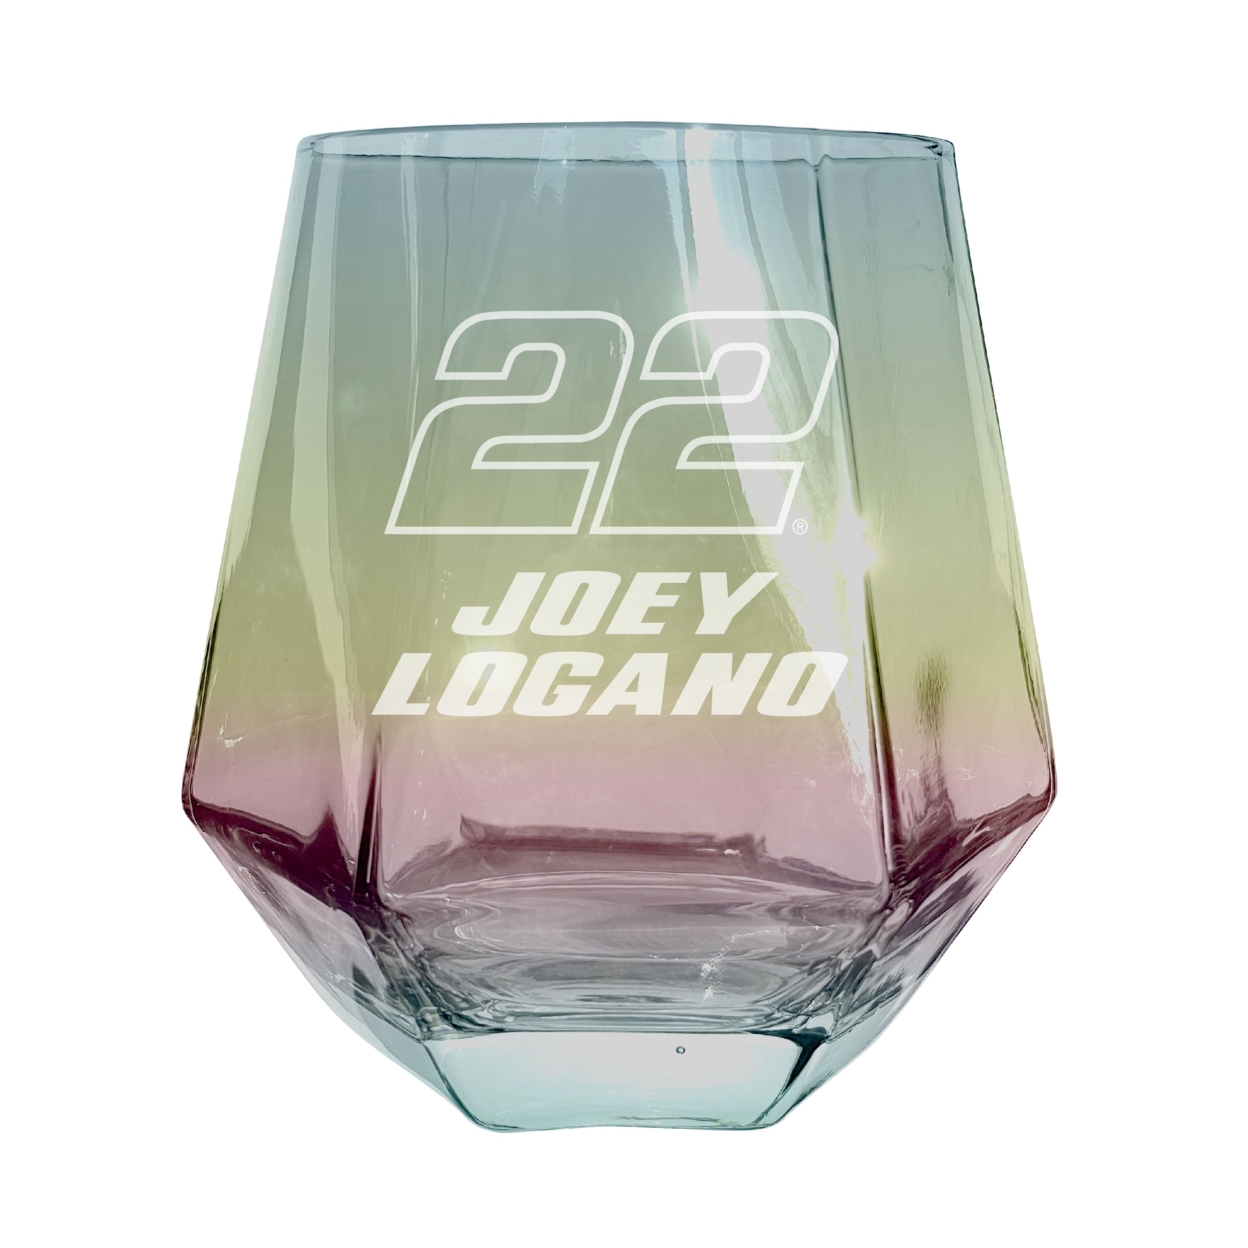 #22 Joey Logano Officially Licensed 10 Oz Engraved Diamond Wine Glass - Grey, 2-Pack